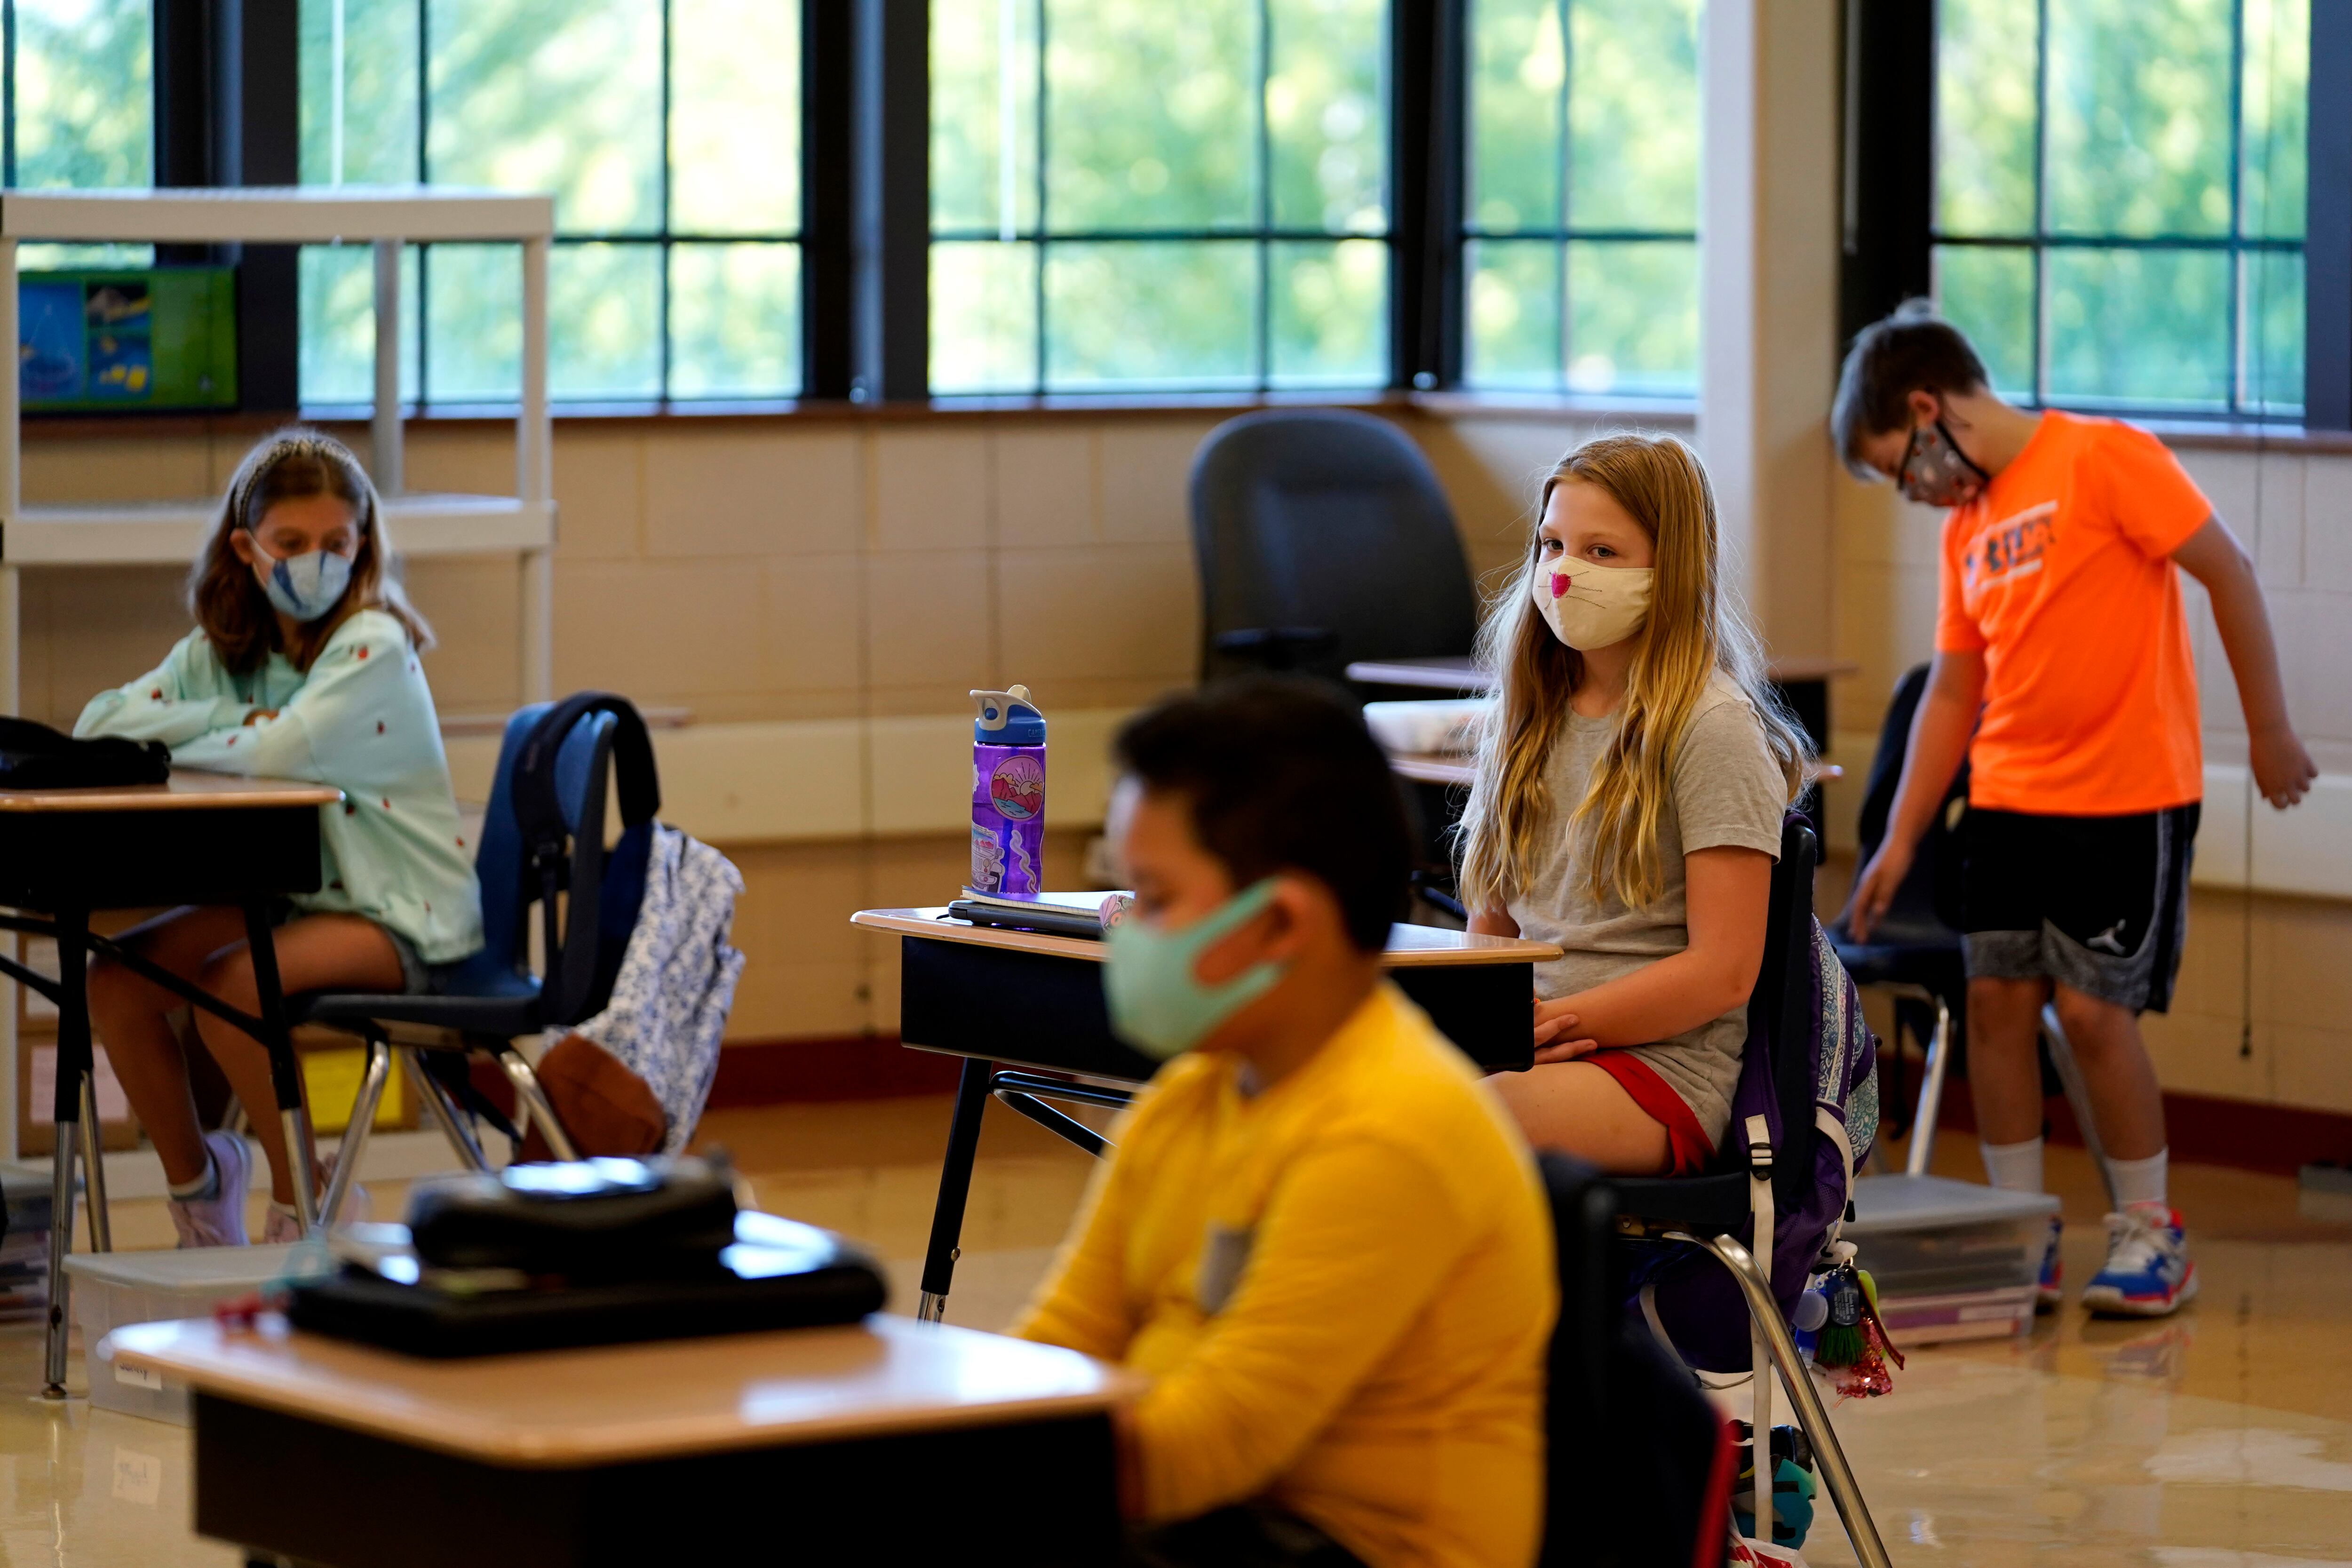 Fifth grade students wear masks as they wait for their teacher in the classroom at Oak Terrace Elementary School in Highwood, Ill.